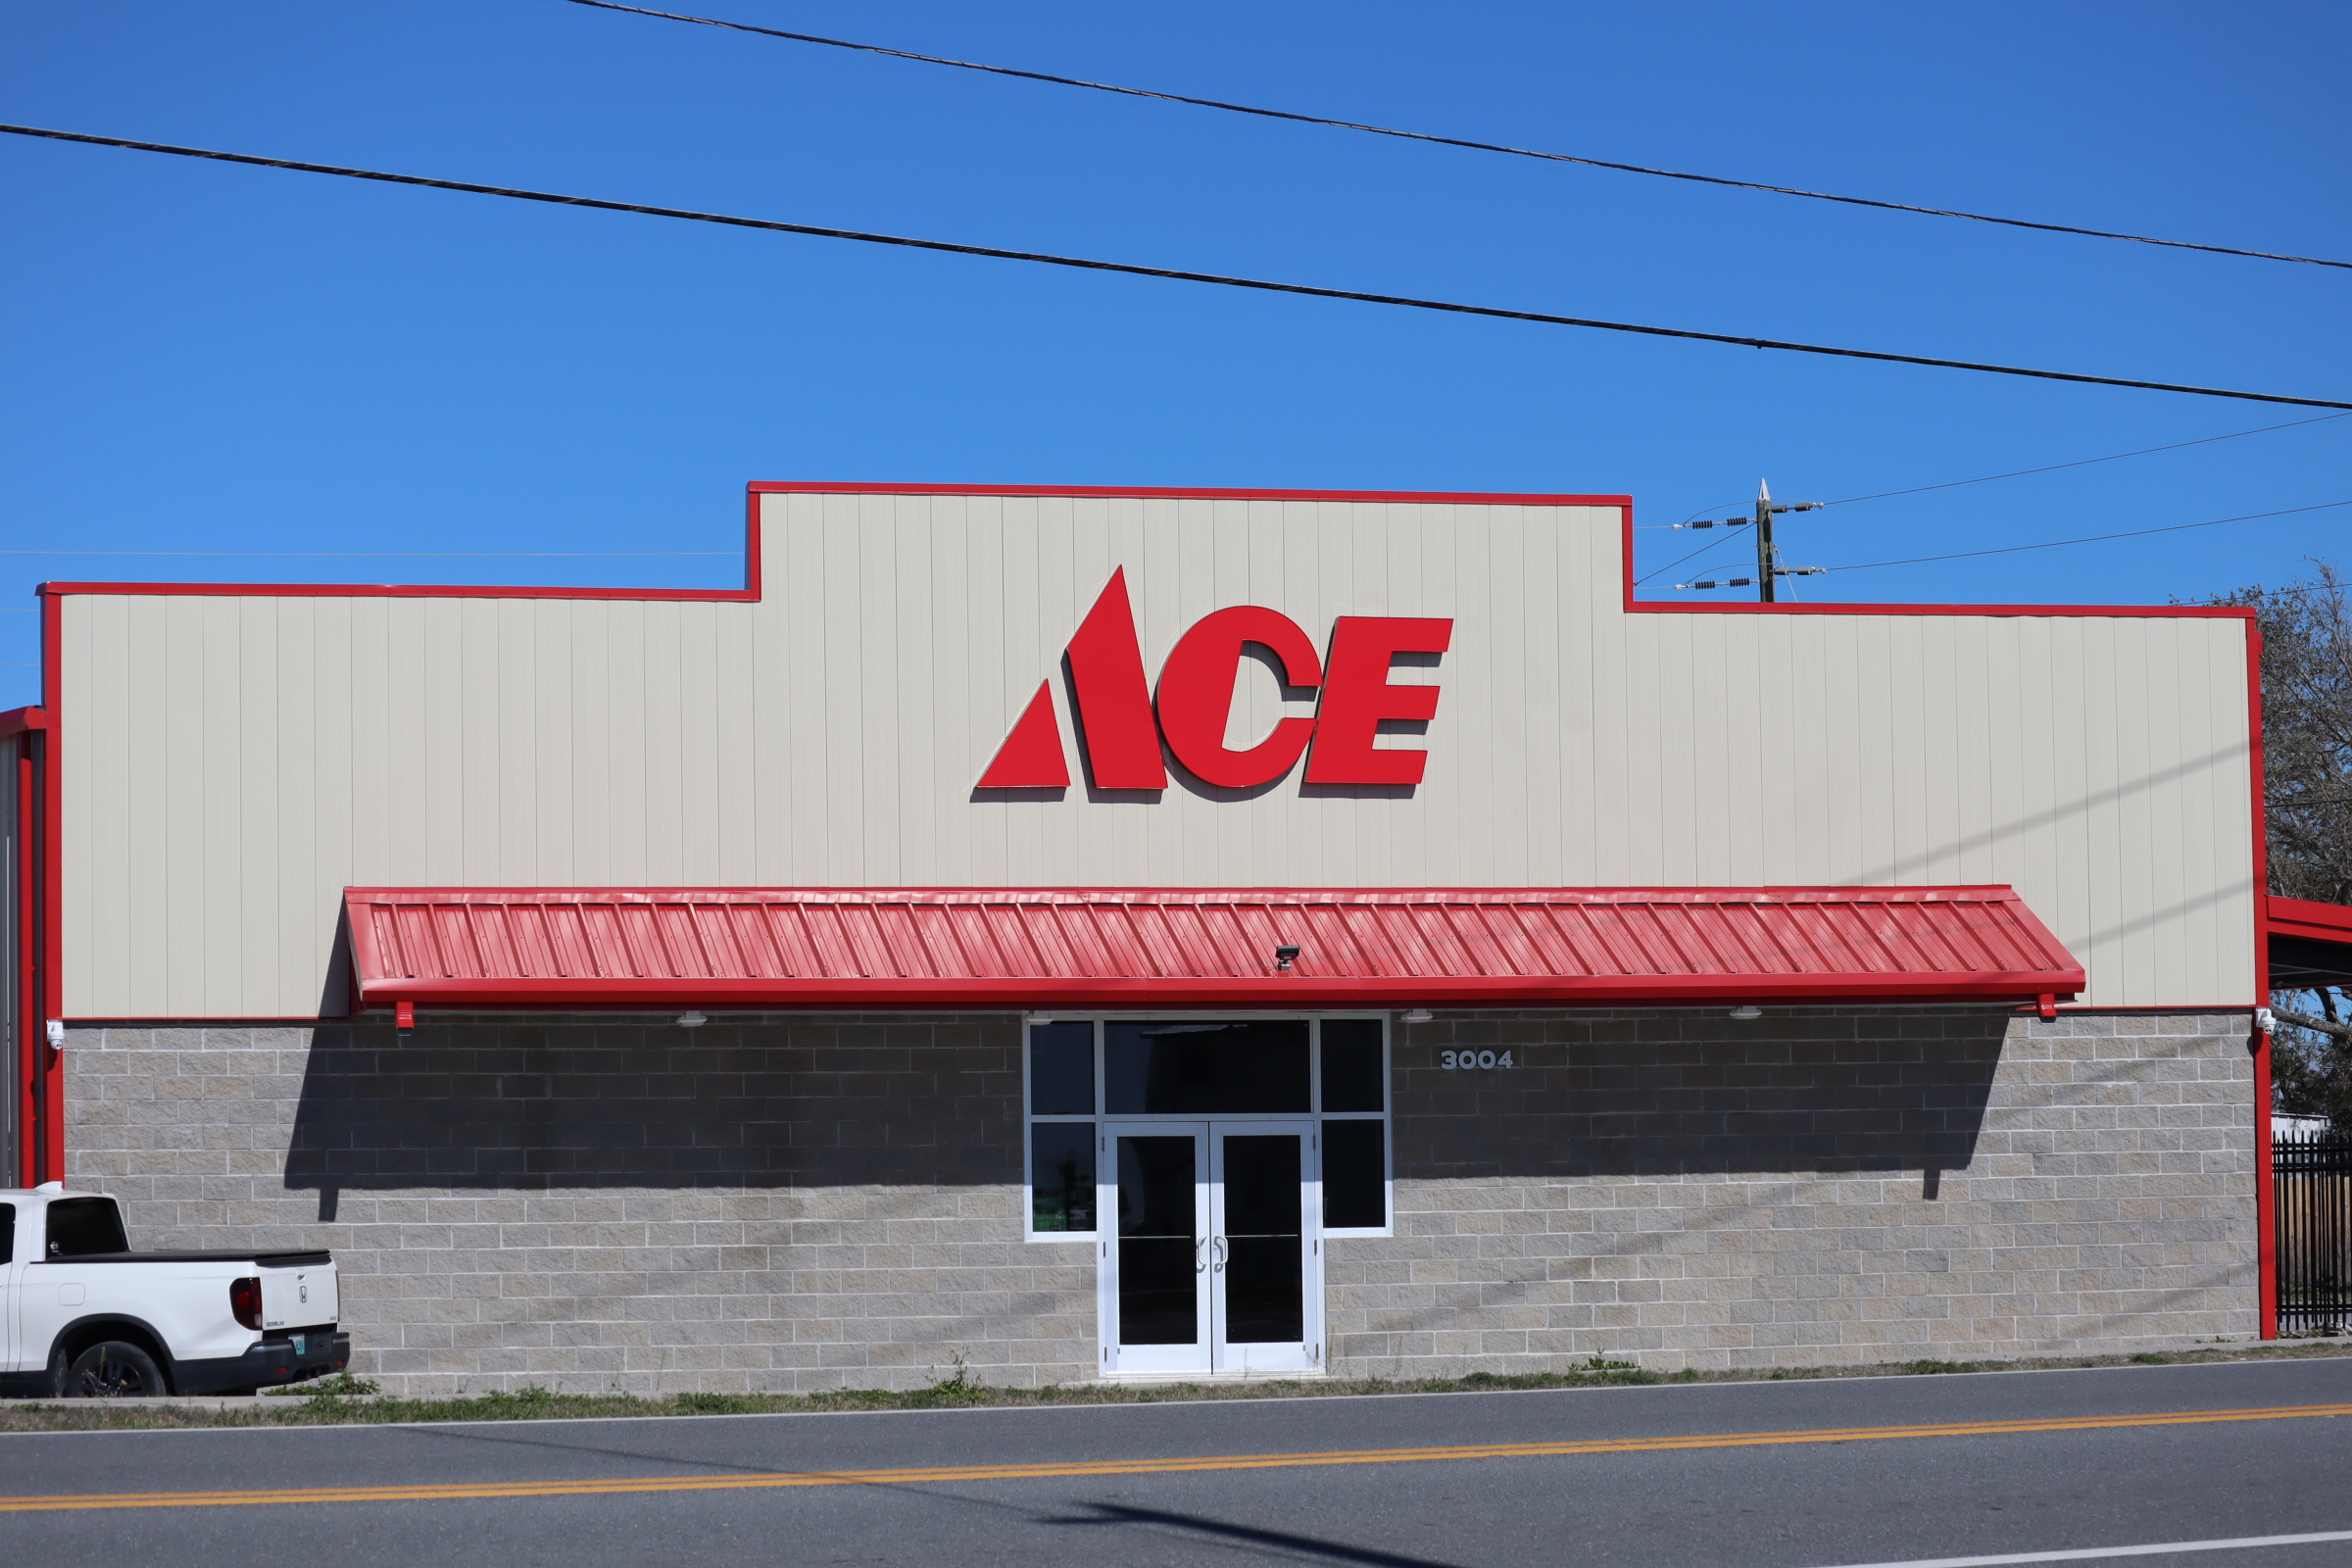 Cathy's Ace Hardware